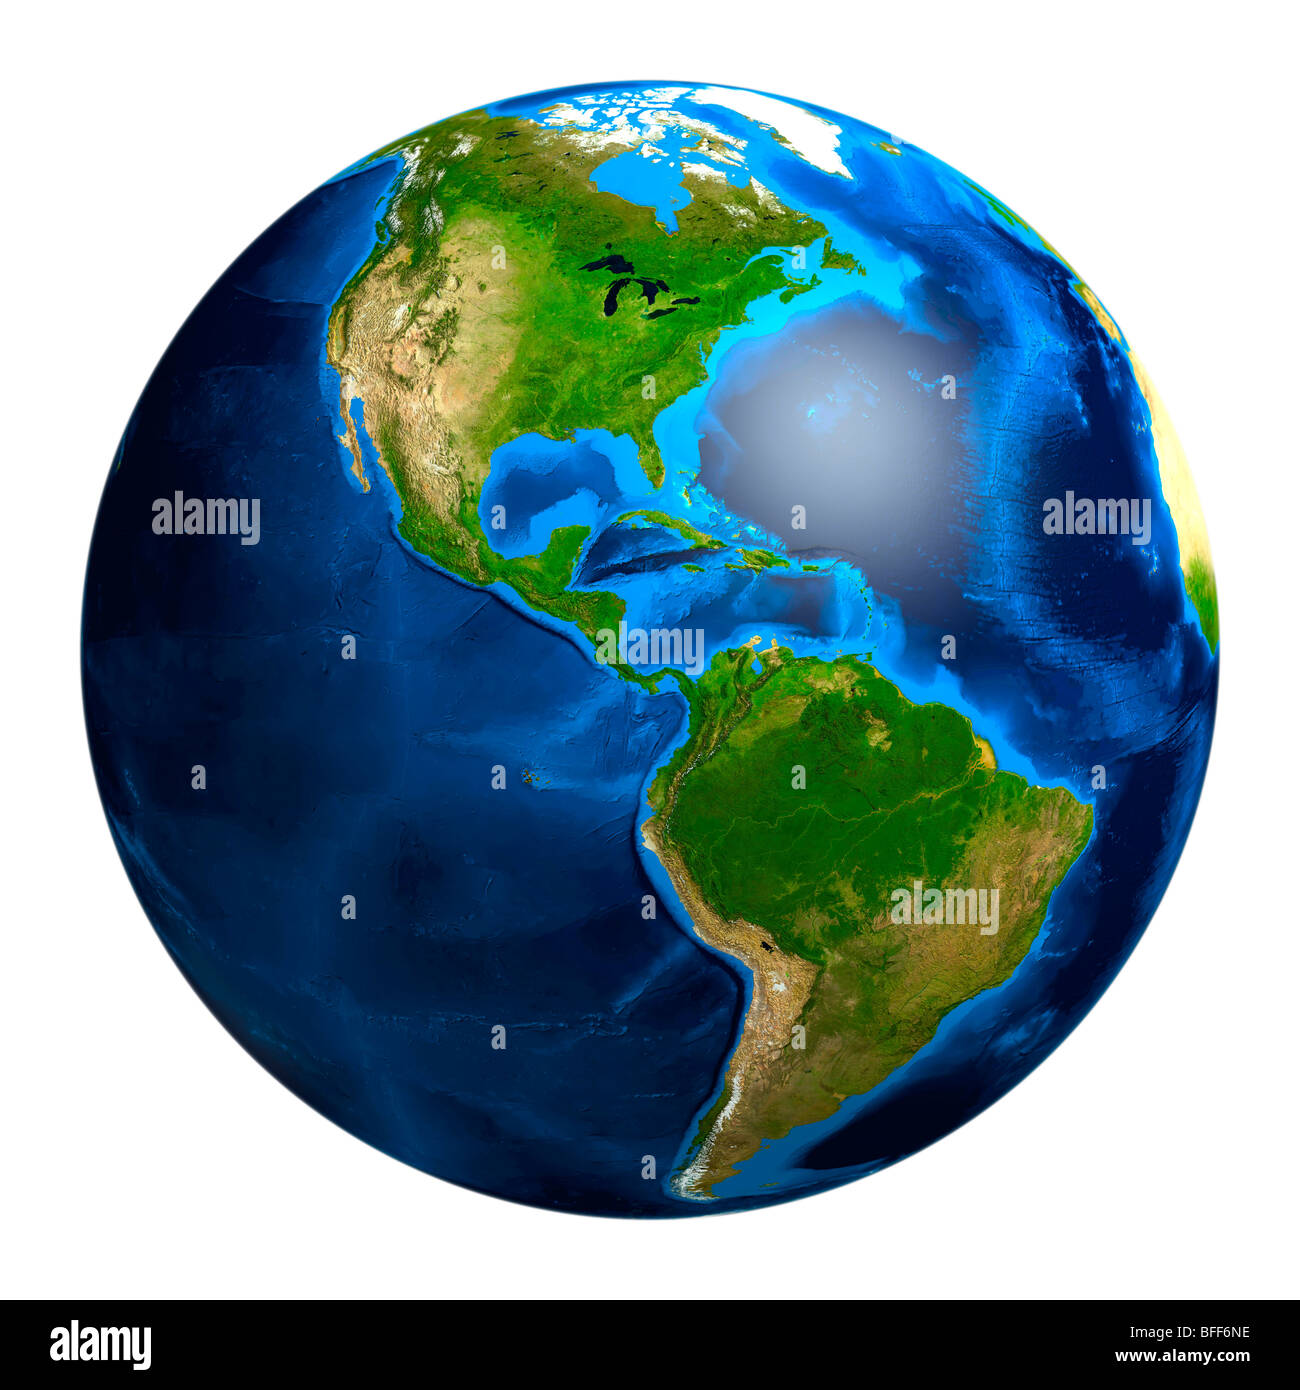 View of the Earth globe from space showing South and North American continents Stock Photo